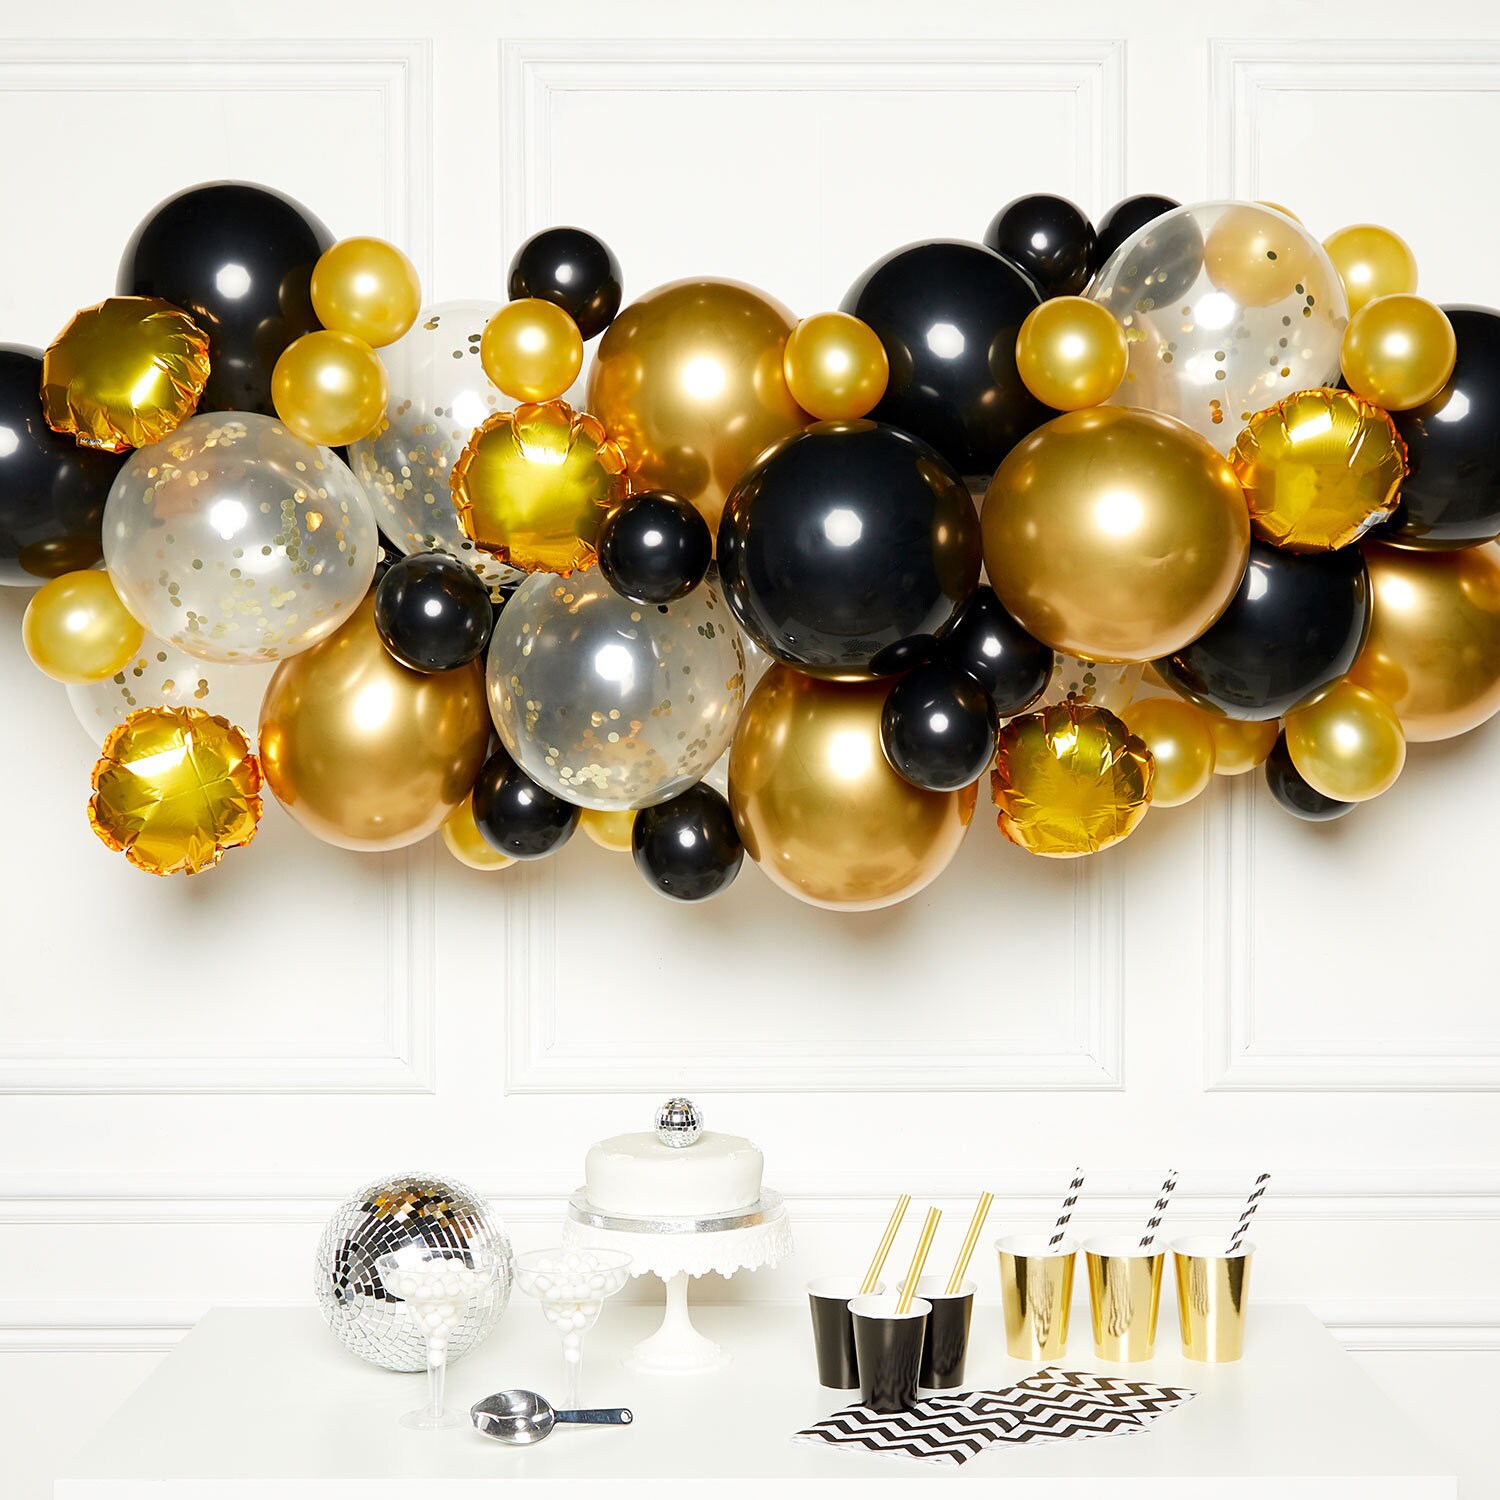 Black and Gold Birthday Decorations, Black and Gold Birthday Party Balloon  Set,metallic Foil Tinsel Fringe Rain Curtain Backdrop 